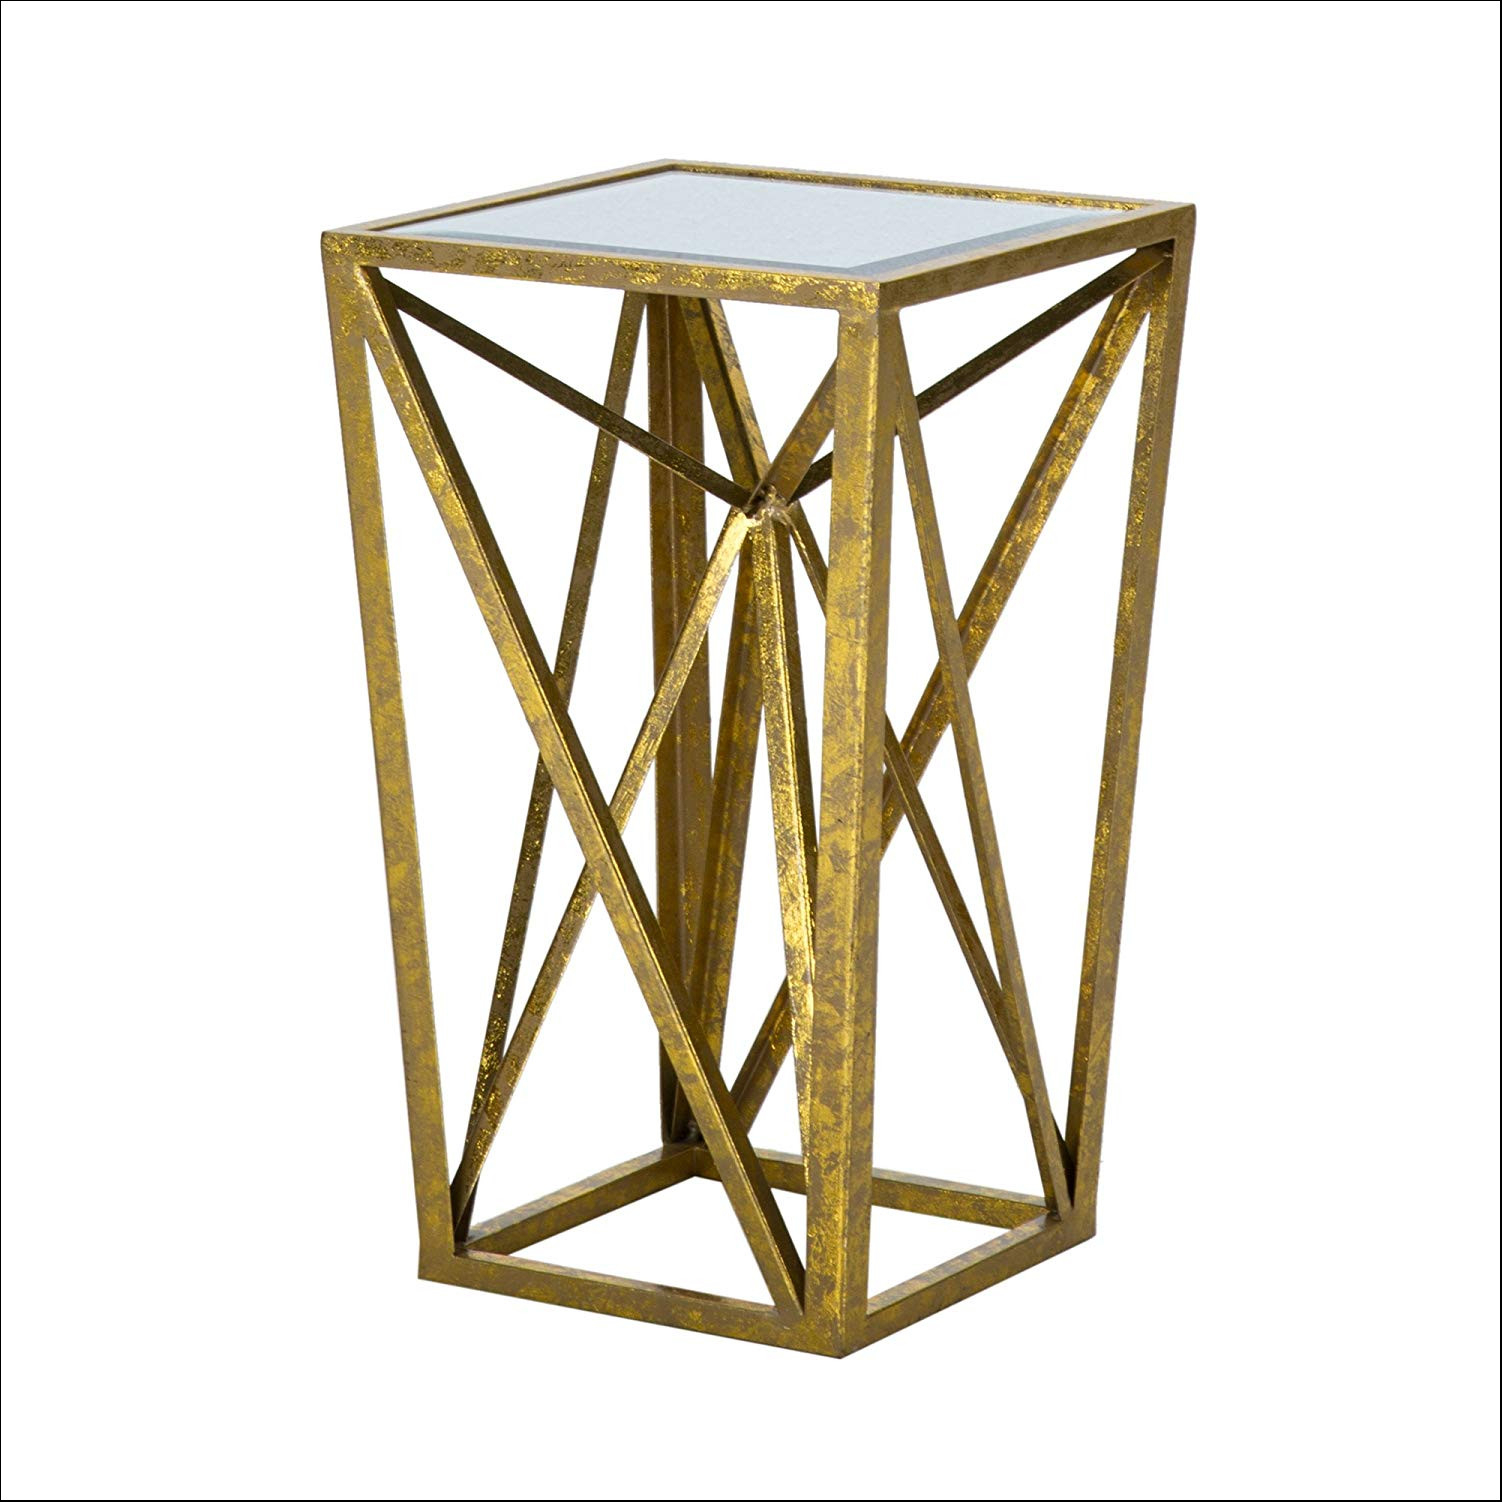 wonderfull madison park angular mirror accent table gold throughout ikea office delivery craigslist furniture legs round skirts decorator red decor small corner wicker outdoor